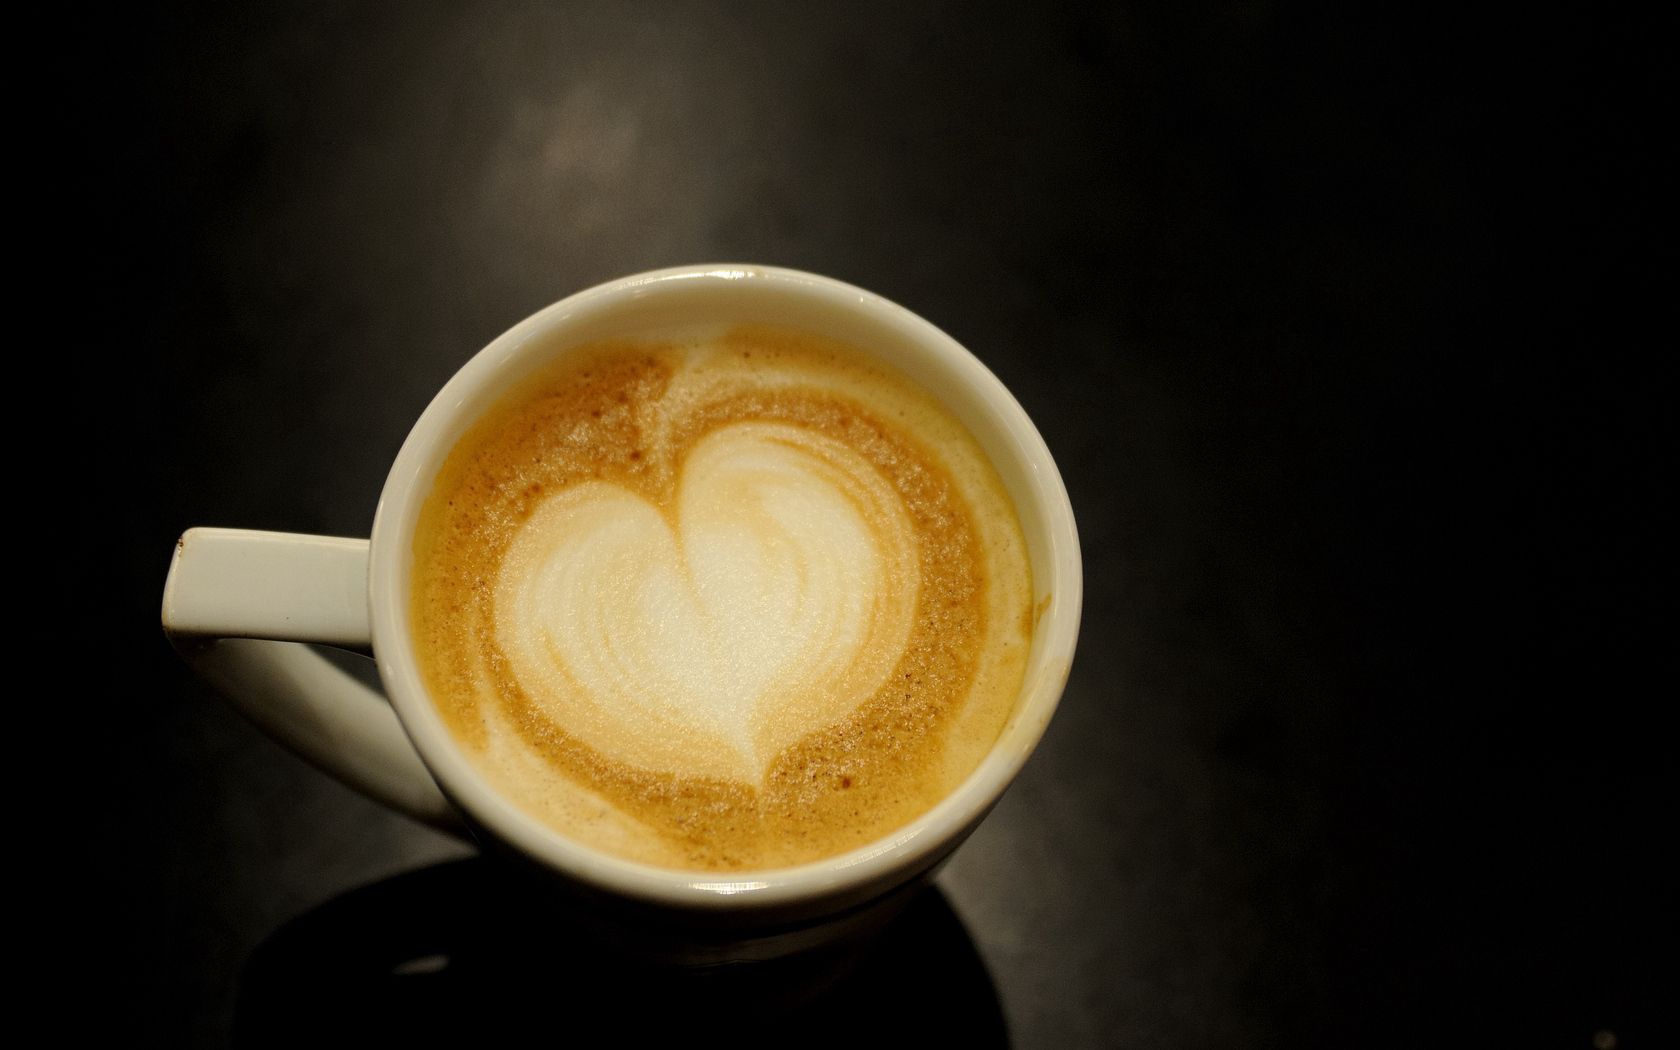 124710 download wallpaper heart, food, coffee, cup screensavers and pictures for free